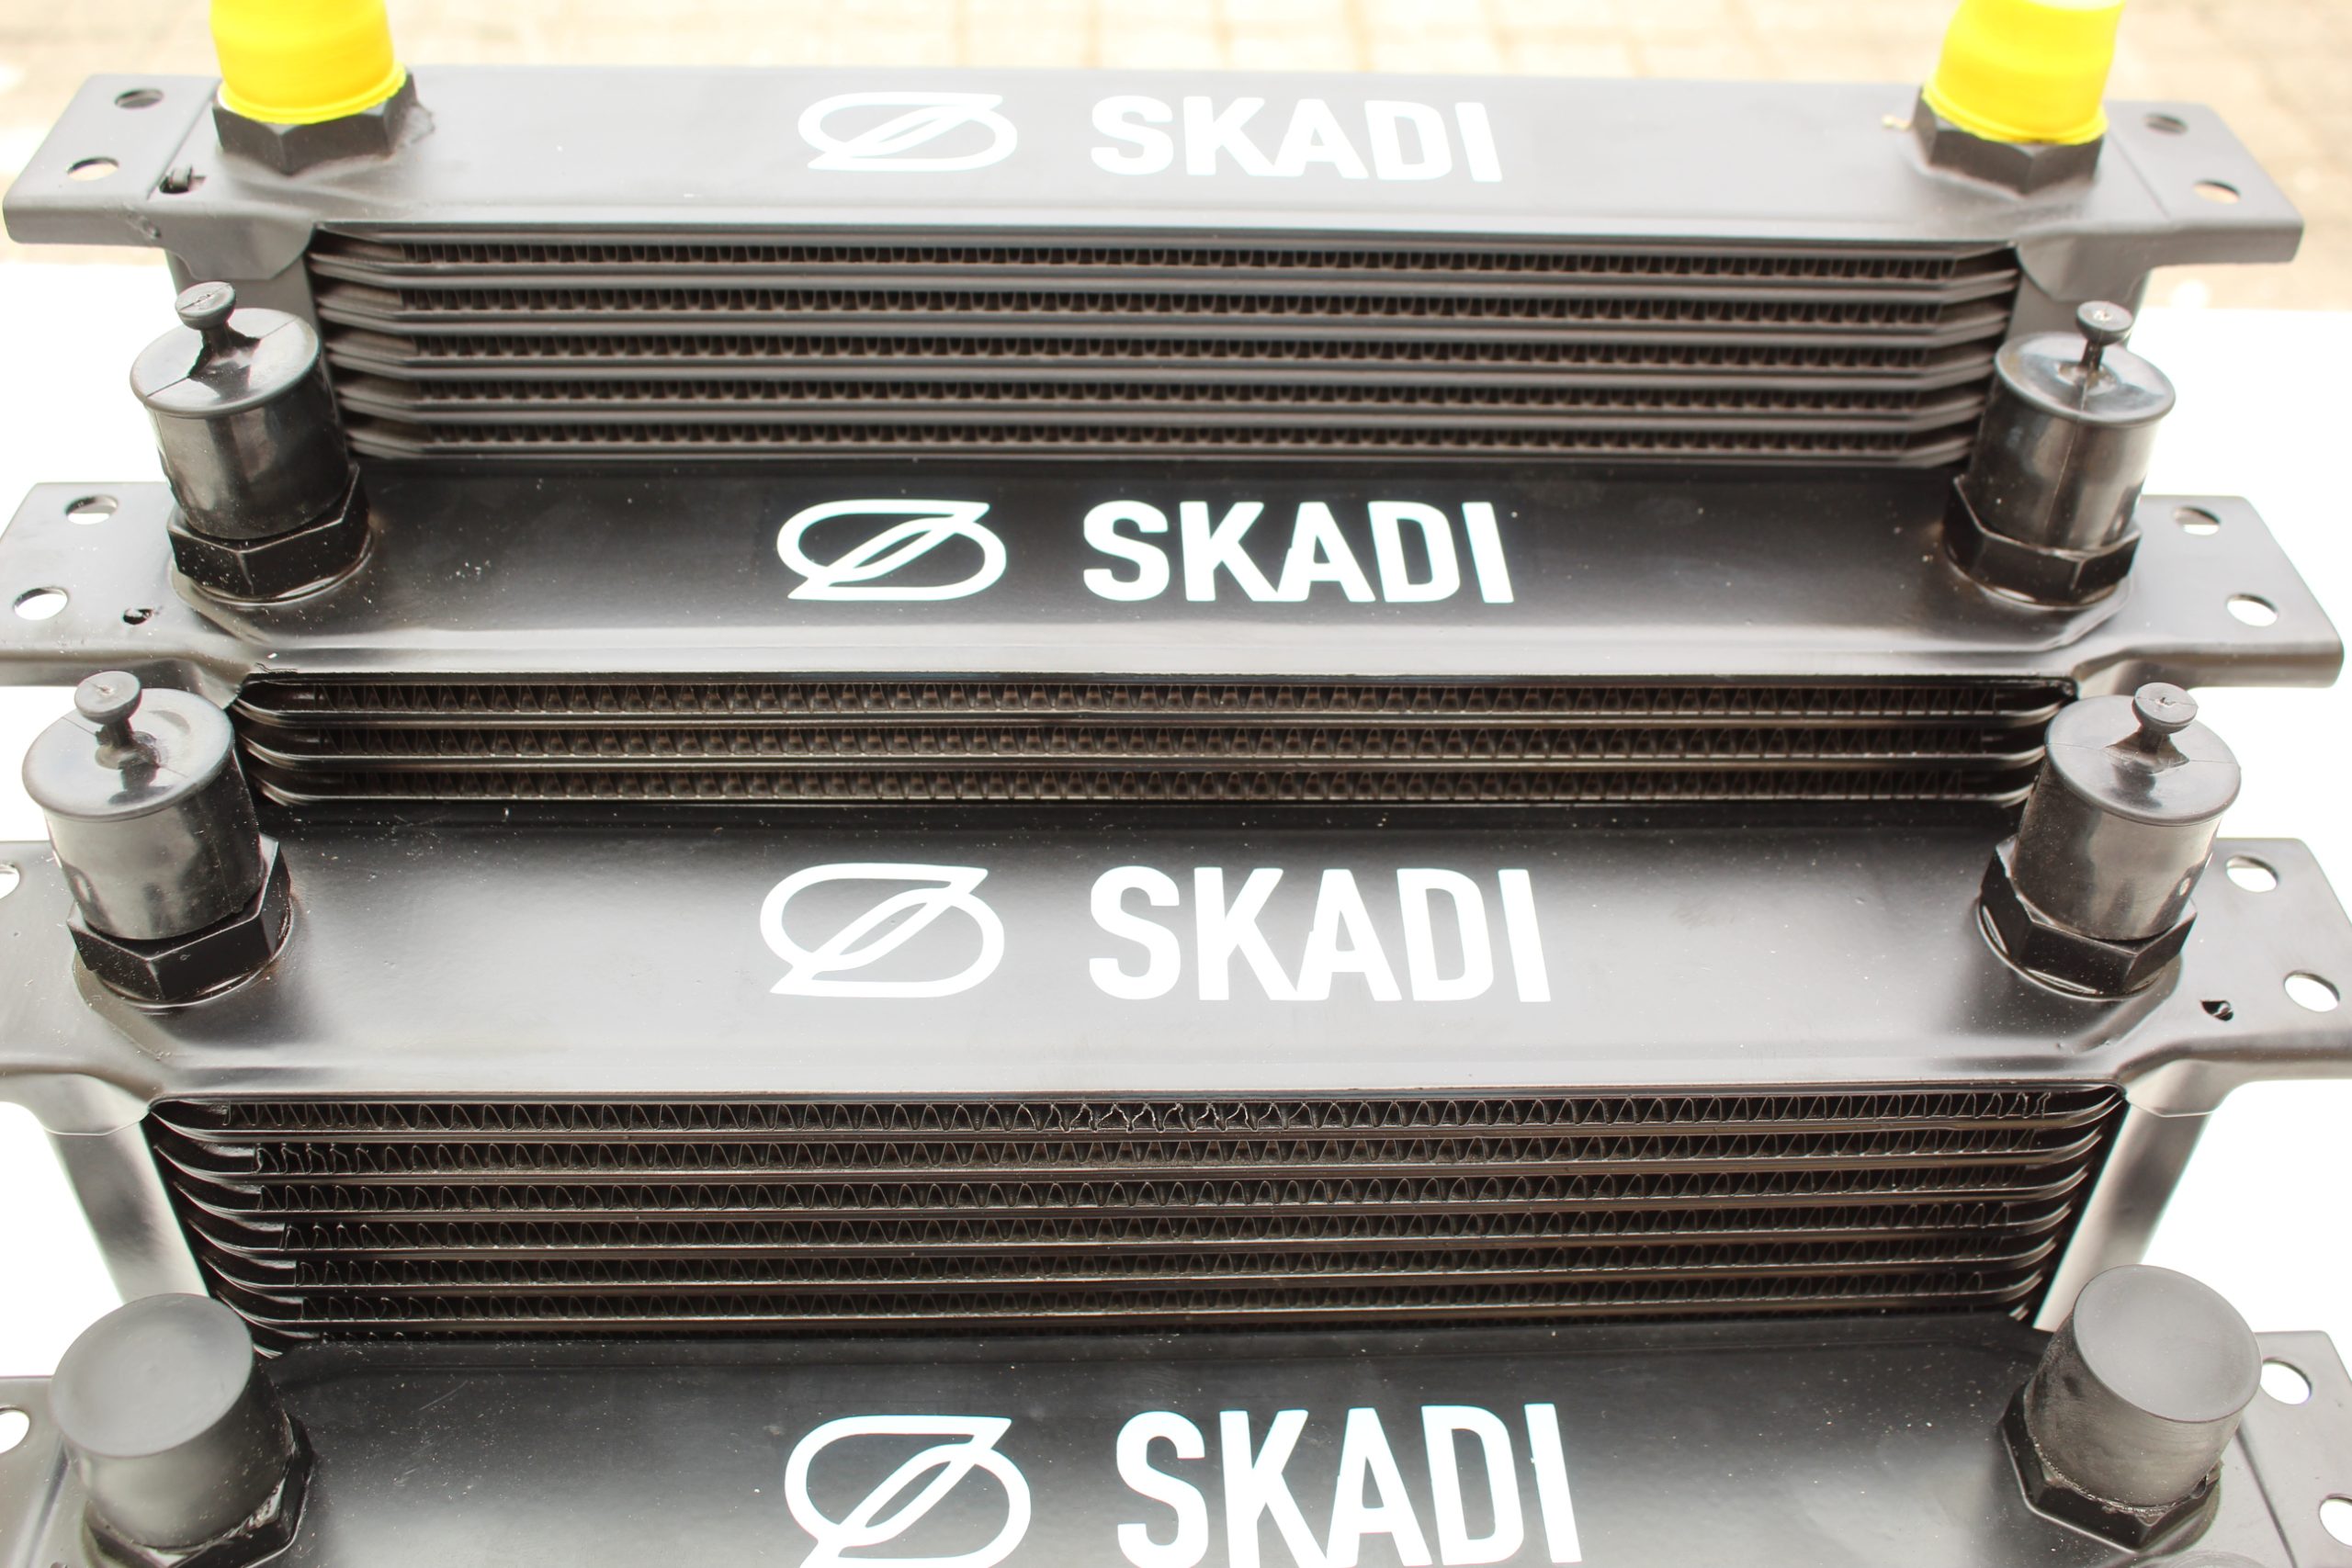 Skadi Cooling 16 Row Oil Cooler, AN-10 Size